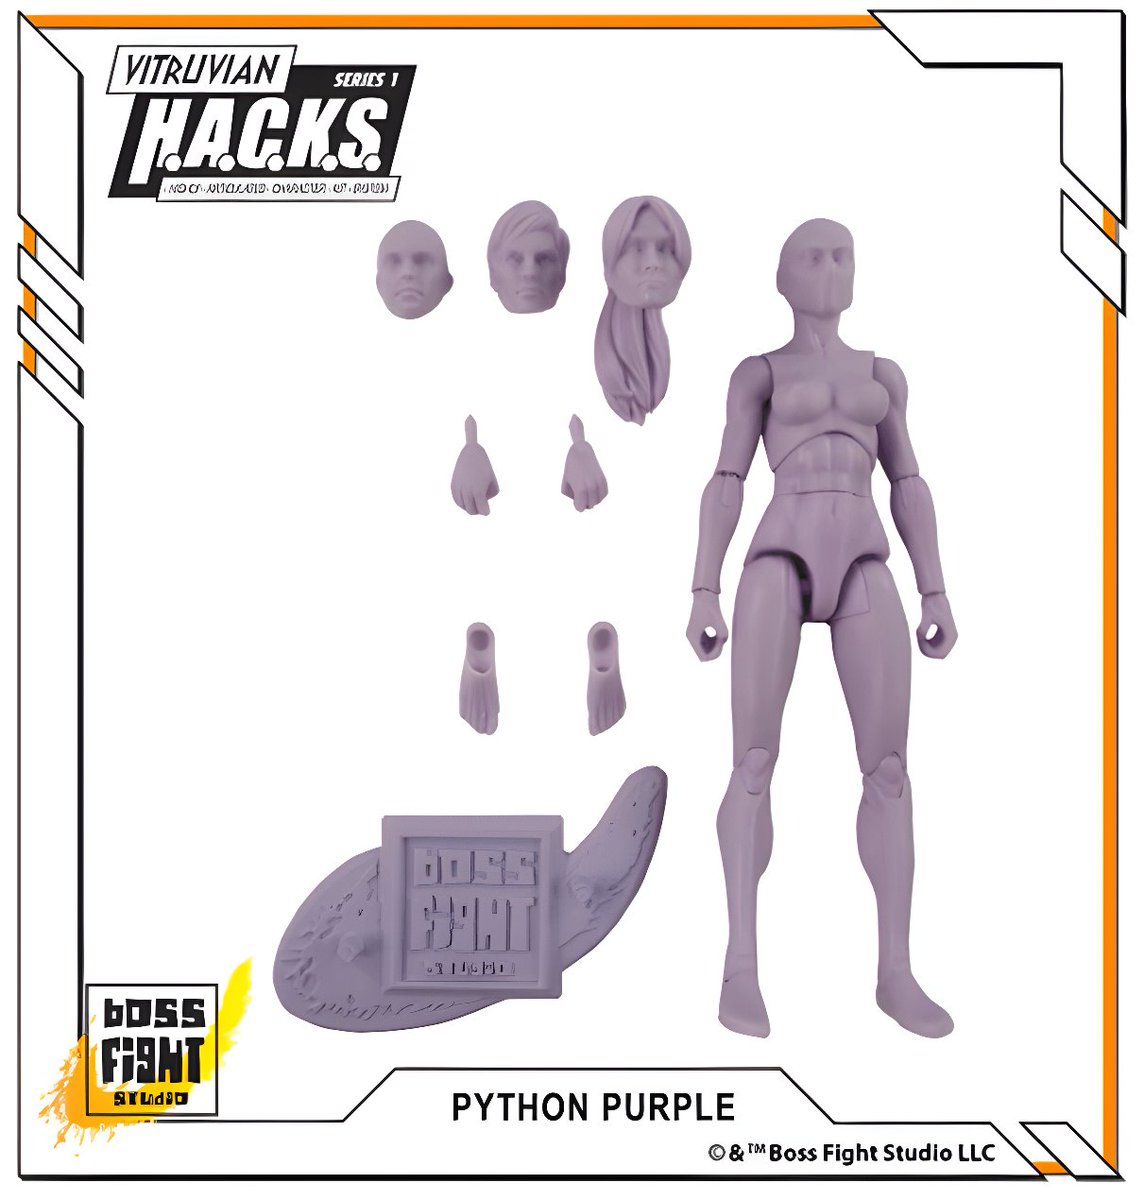 Looking for some customization fun? We've got you covered! Our VITRUVIAN H.A.C.K.S. ACTION FIGURE BLANKS are available in both male and female versions and in more than a dozen colors! These figures are your ultimate canvas for customization! tinyurl.com/3rvuprjm